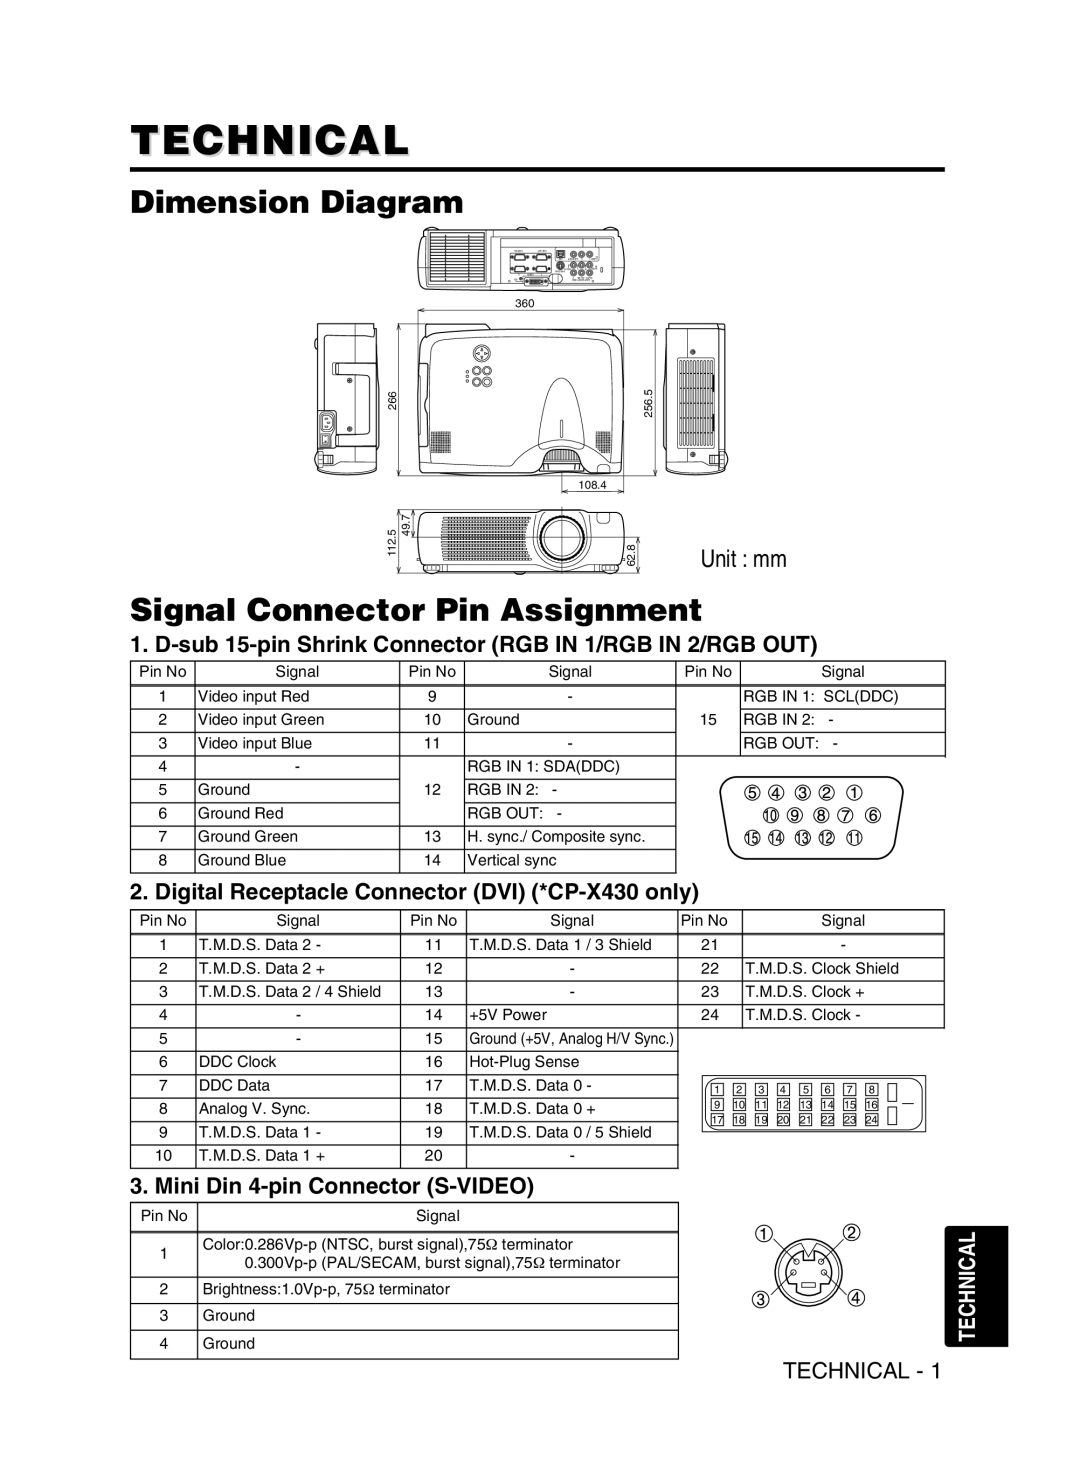 Dukane 8053 Technical, Dimension Diagram, Signal Connector Pin Assignment, Digital Receptacle Connector DVI *CP-X430 only 